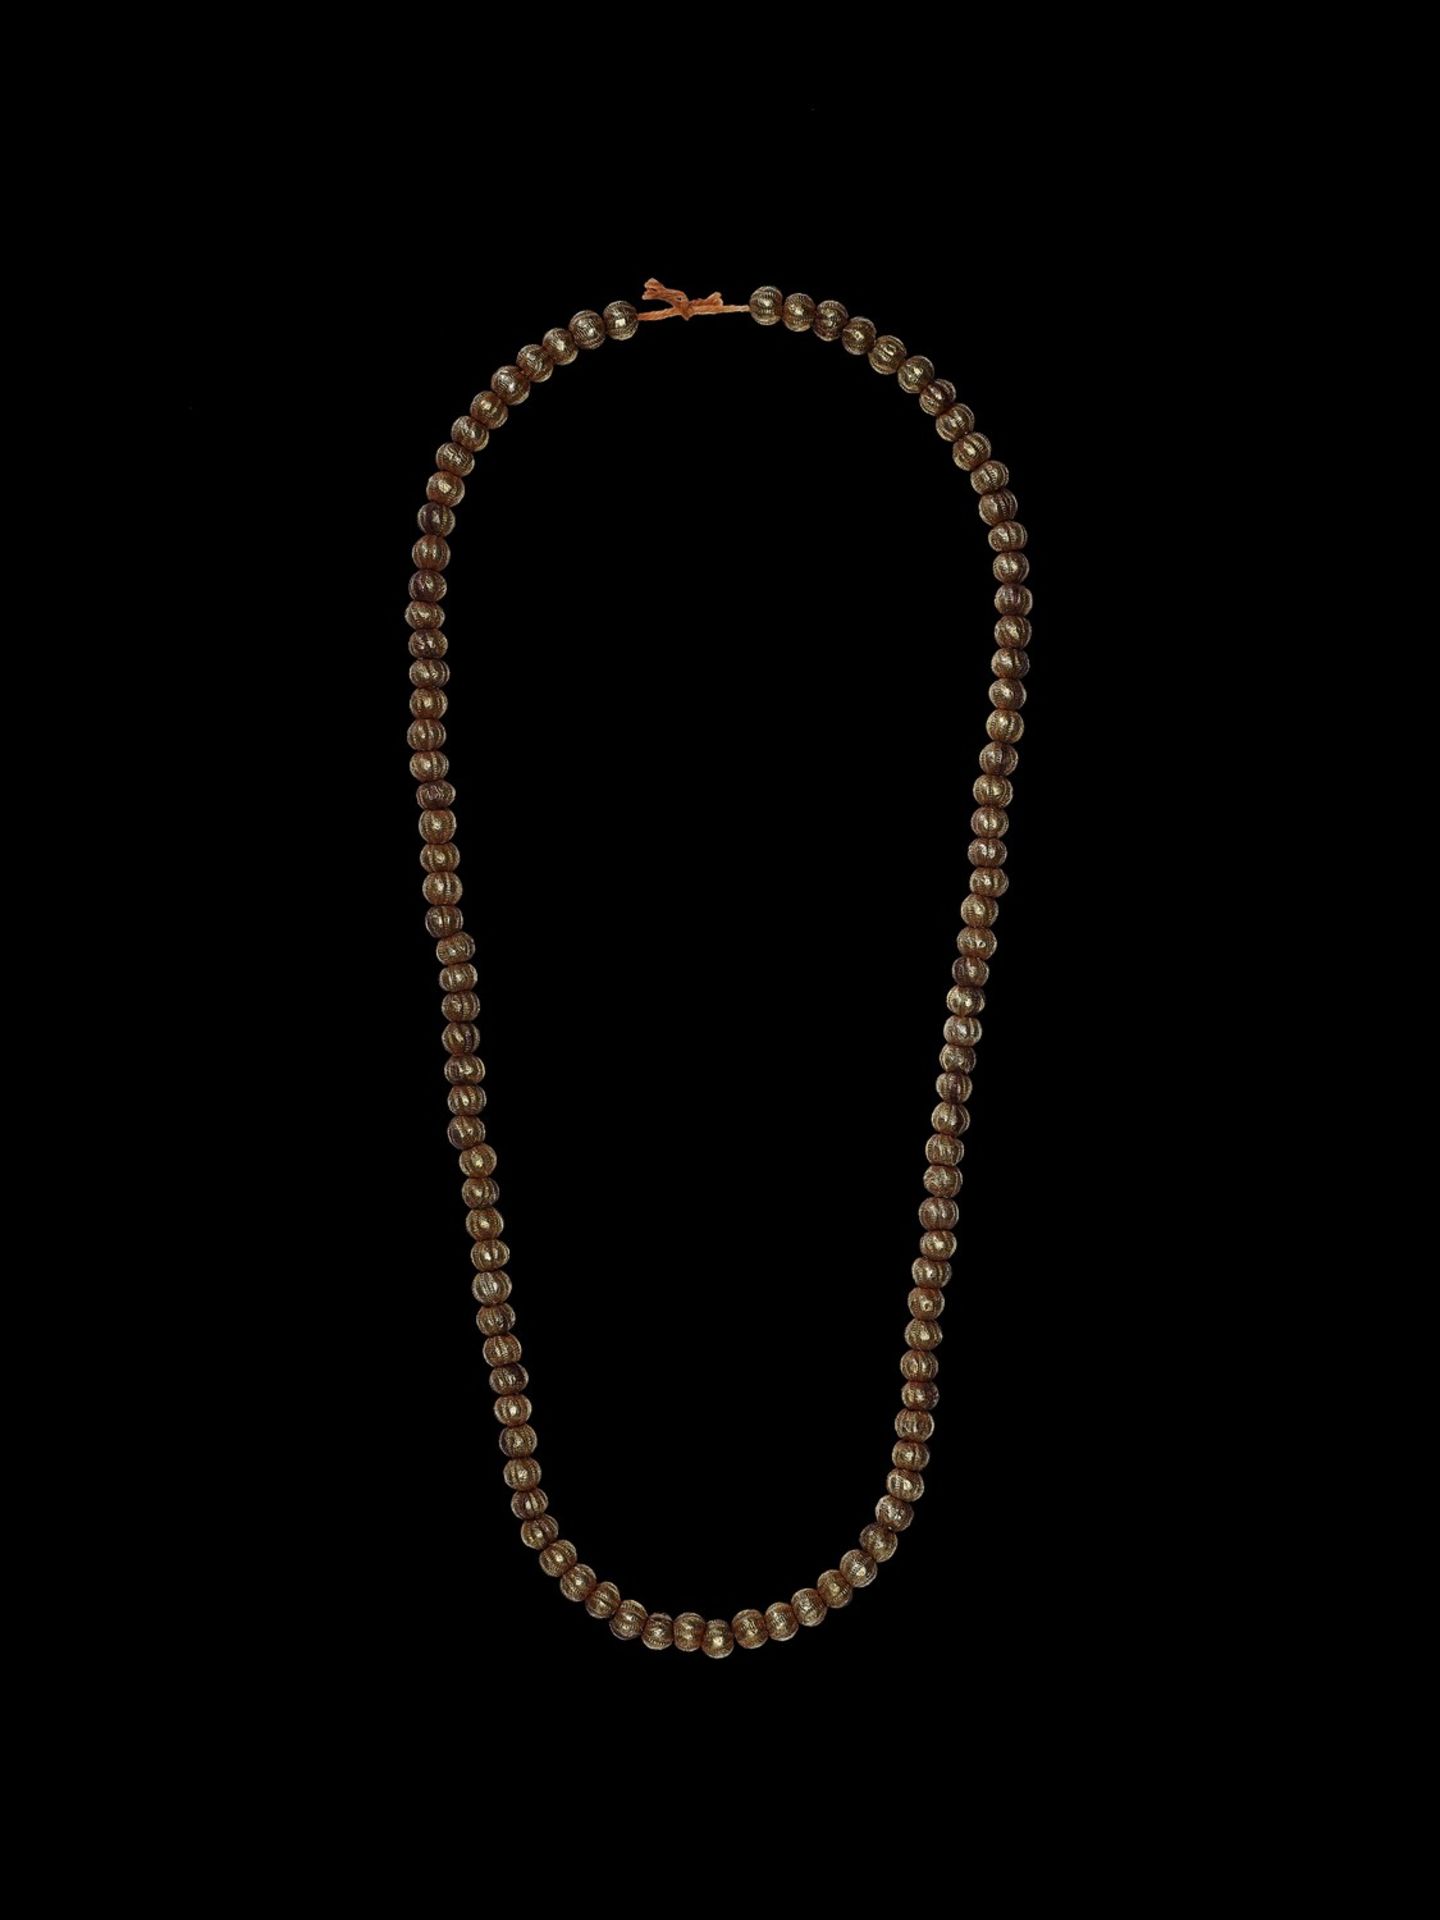 A BURMESE NECKLACE WITH 100 GILT DRY LACQUER BEADS - Image 2 of 2